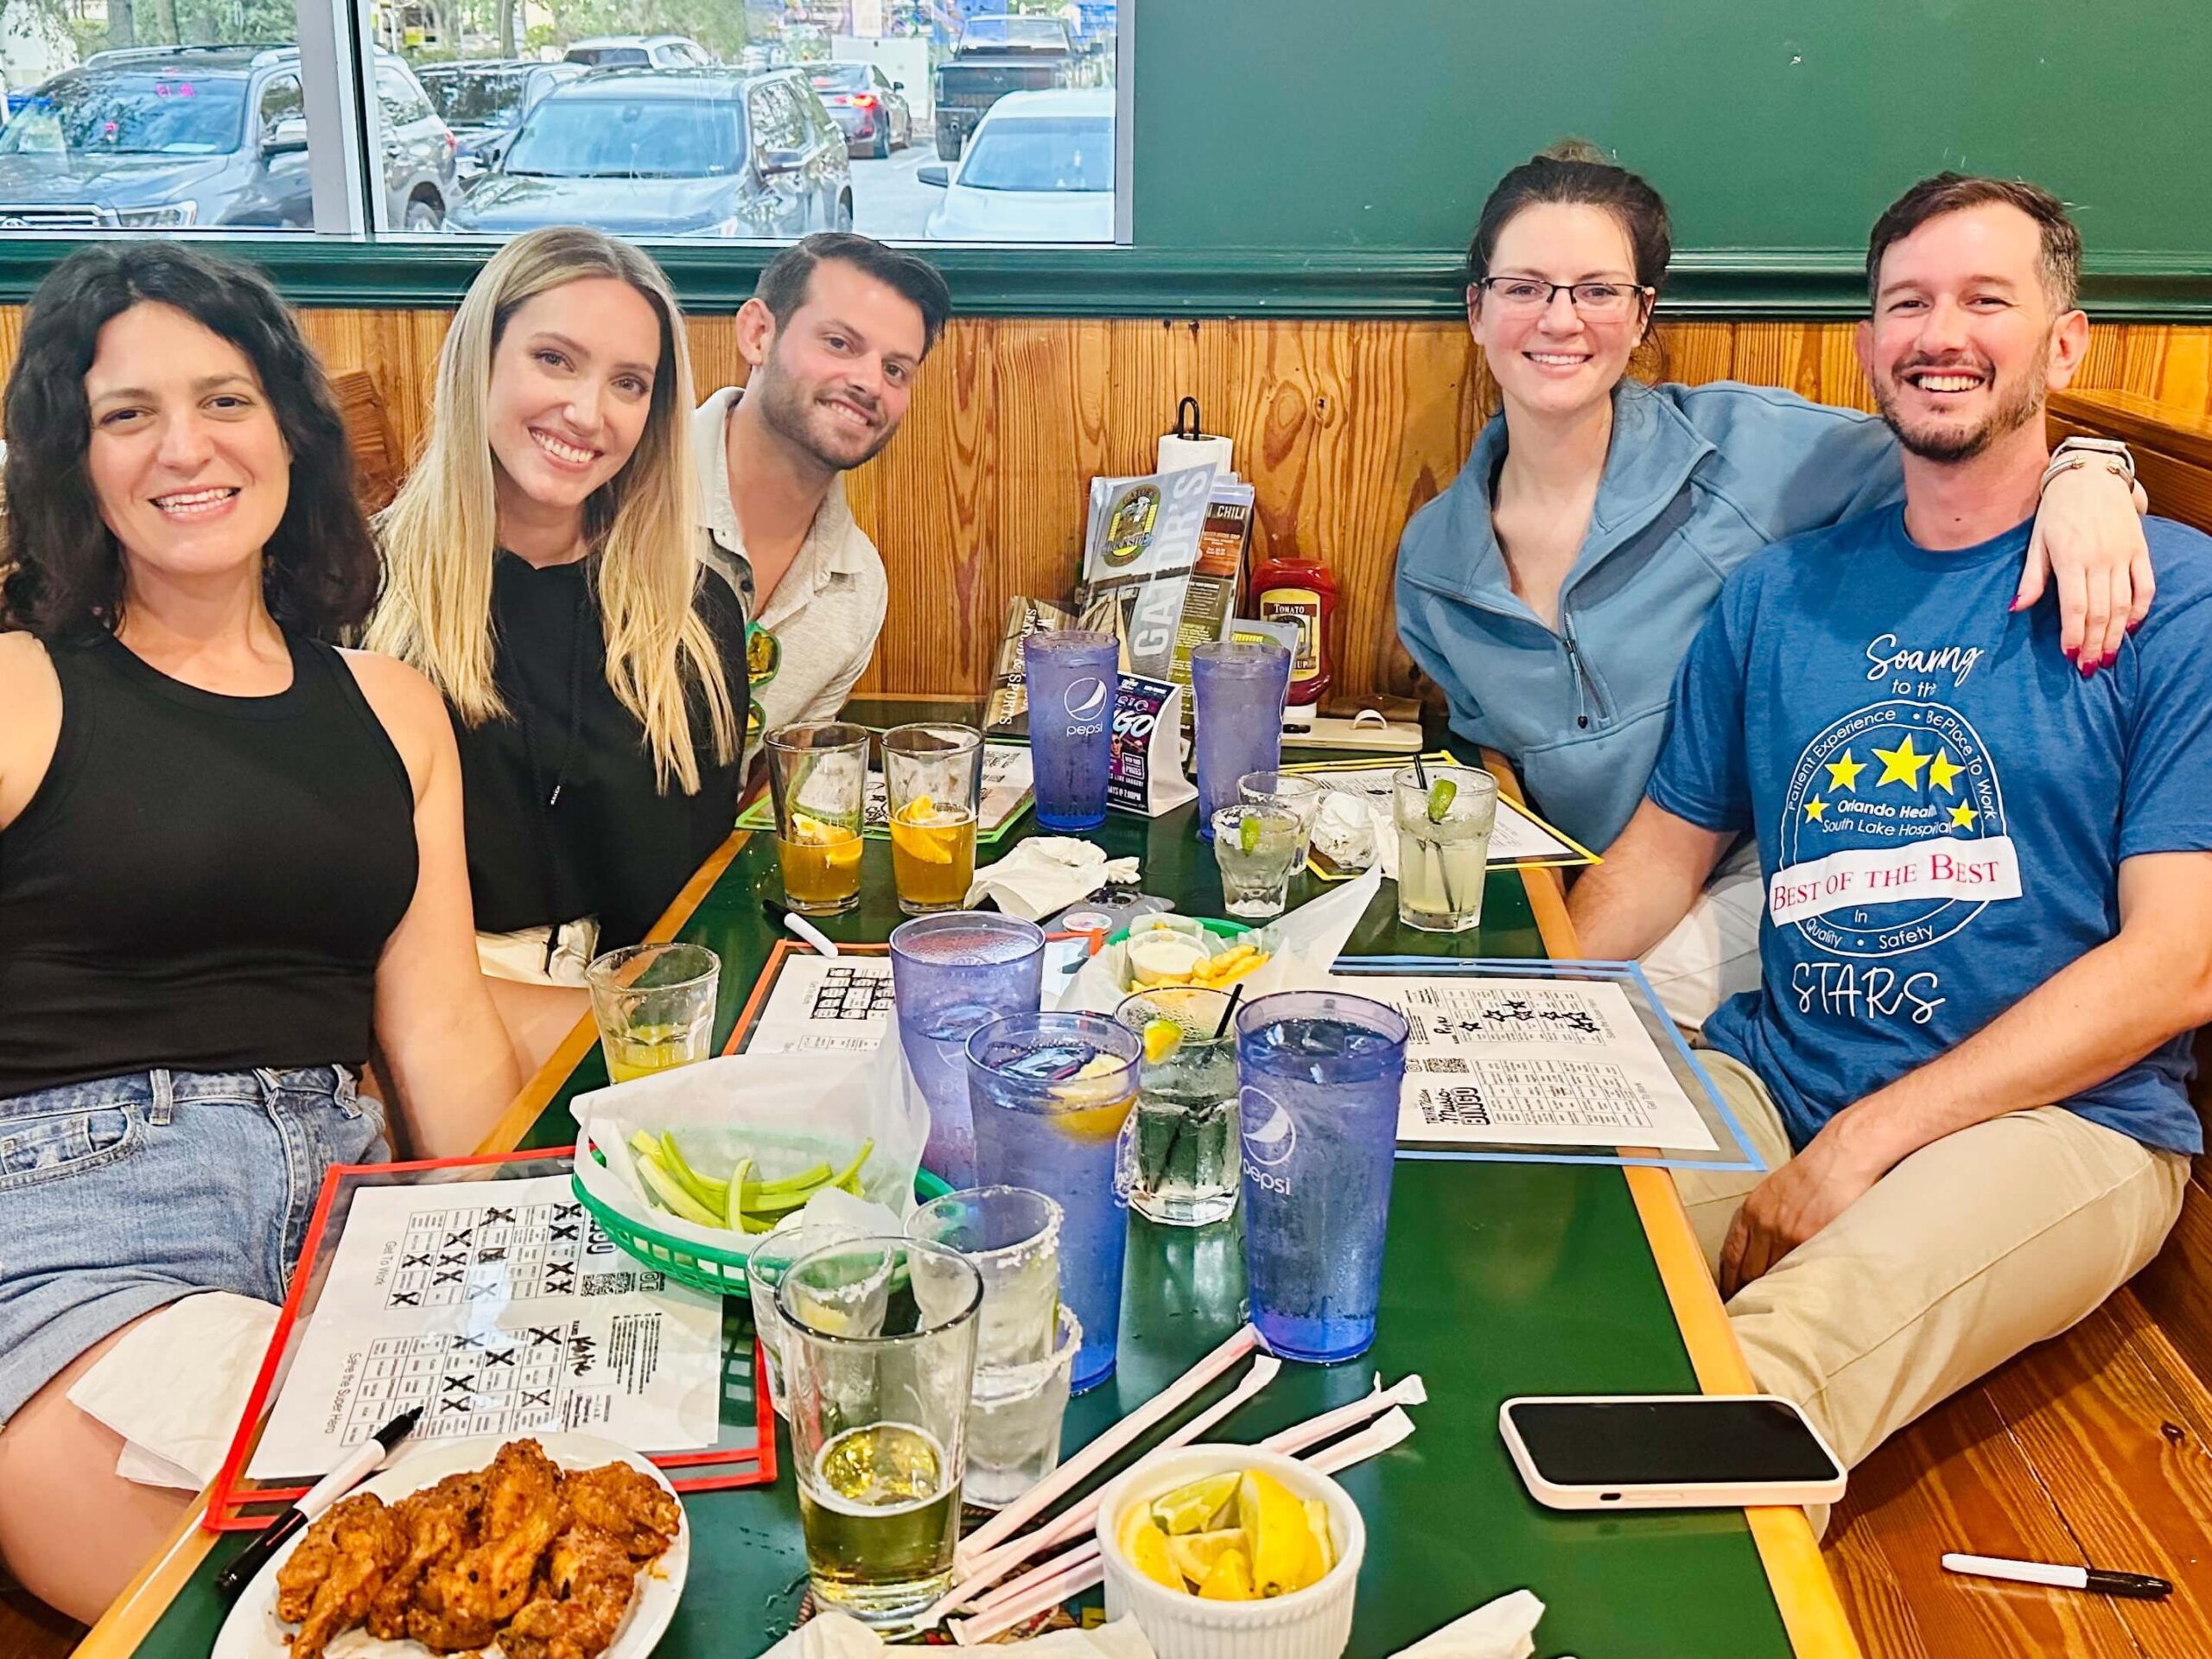 Gators Dockside Jacksonville FL 32222 trivia night: group of attractive young men and women seated around a green table with food including wings on the table as well as music bingo cards